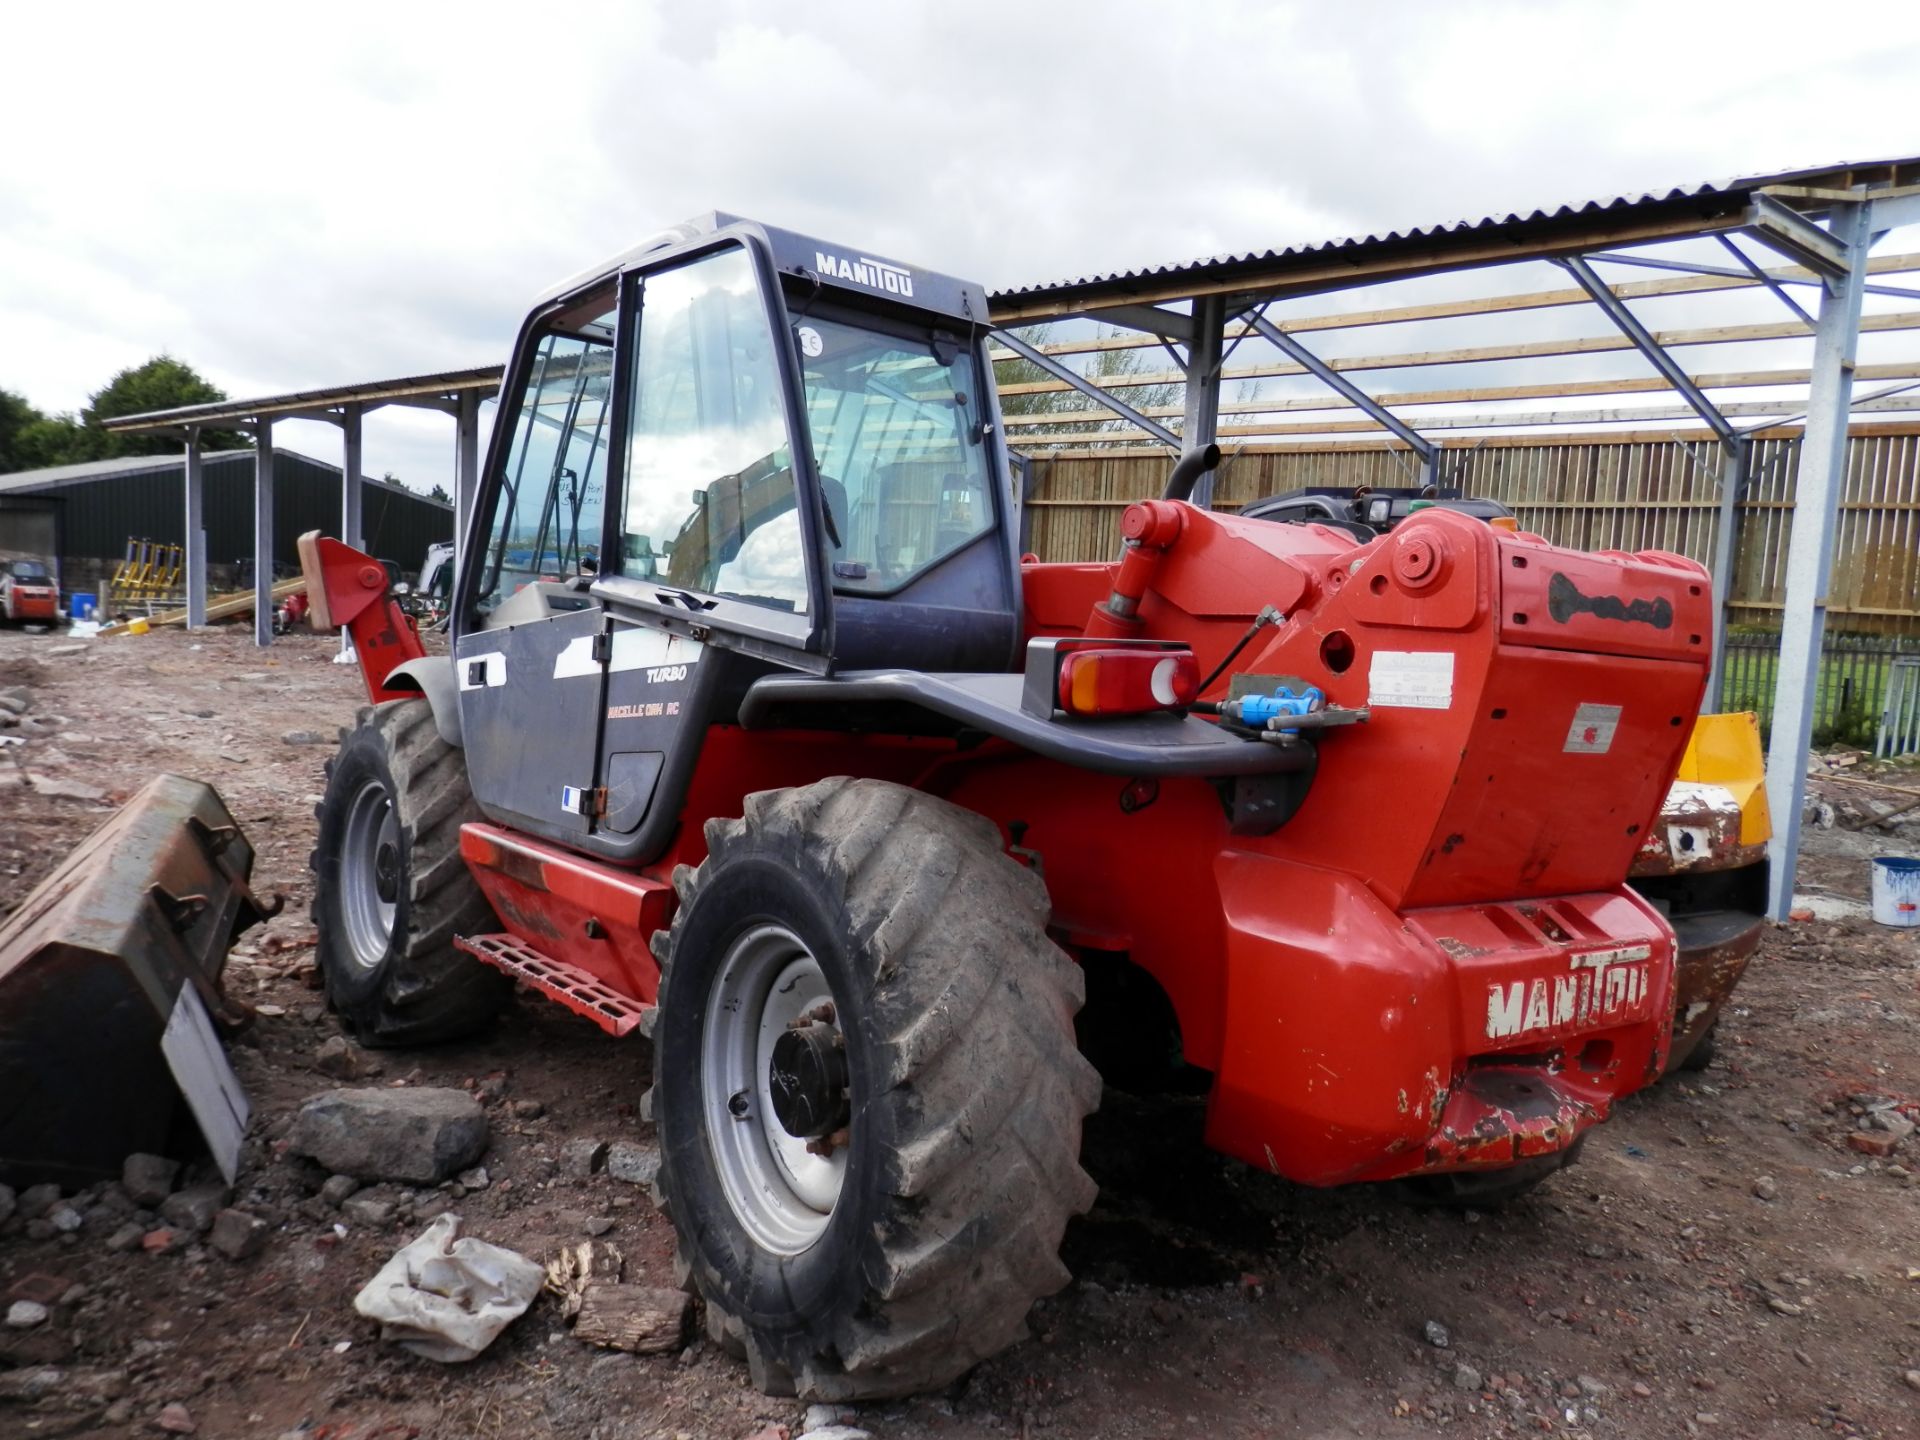 2003 MANITOU MANISCOPIC TELE LIFT WITH FORKS,3.5 TONNE LIFT CAPACITY. - Image 4 of 10